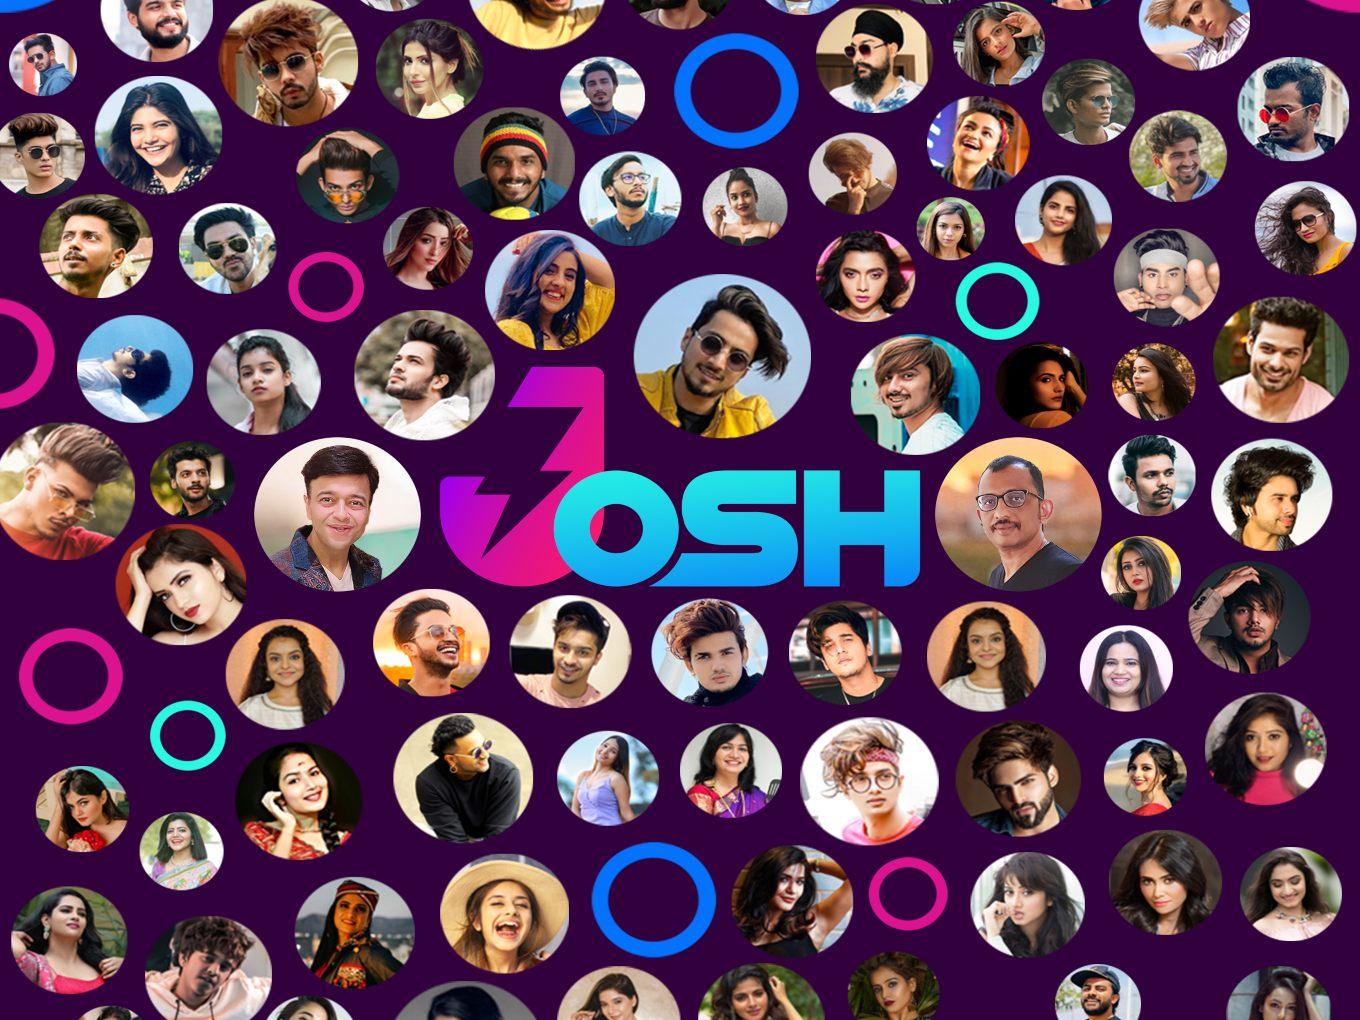 DailyHunt’s Short Video App Josh Records 50 Mn Downloads, 23 Mn DAUs In 45 Days Of Launch